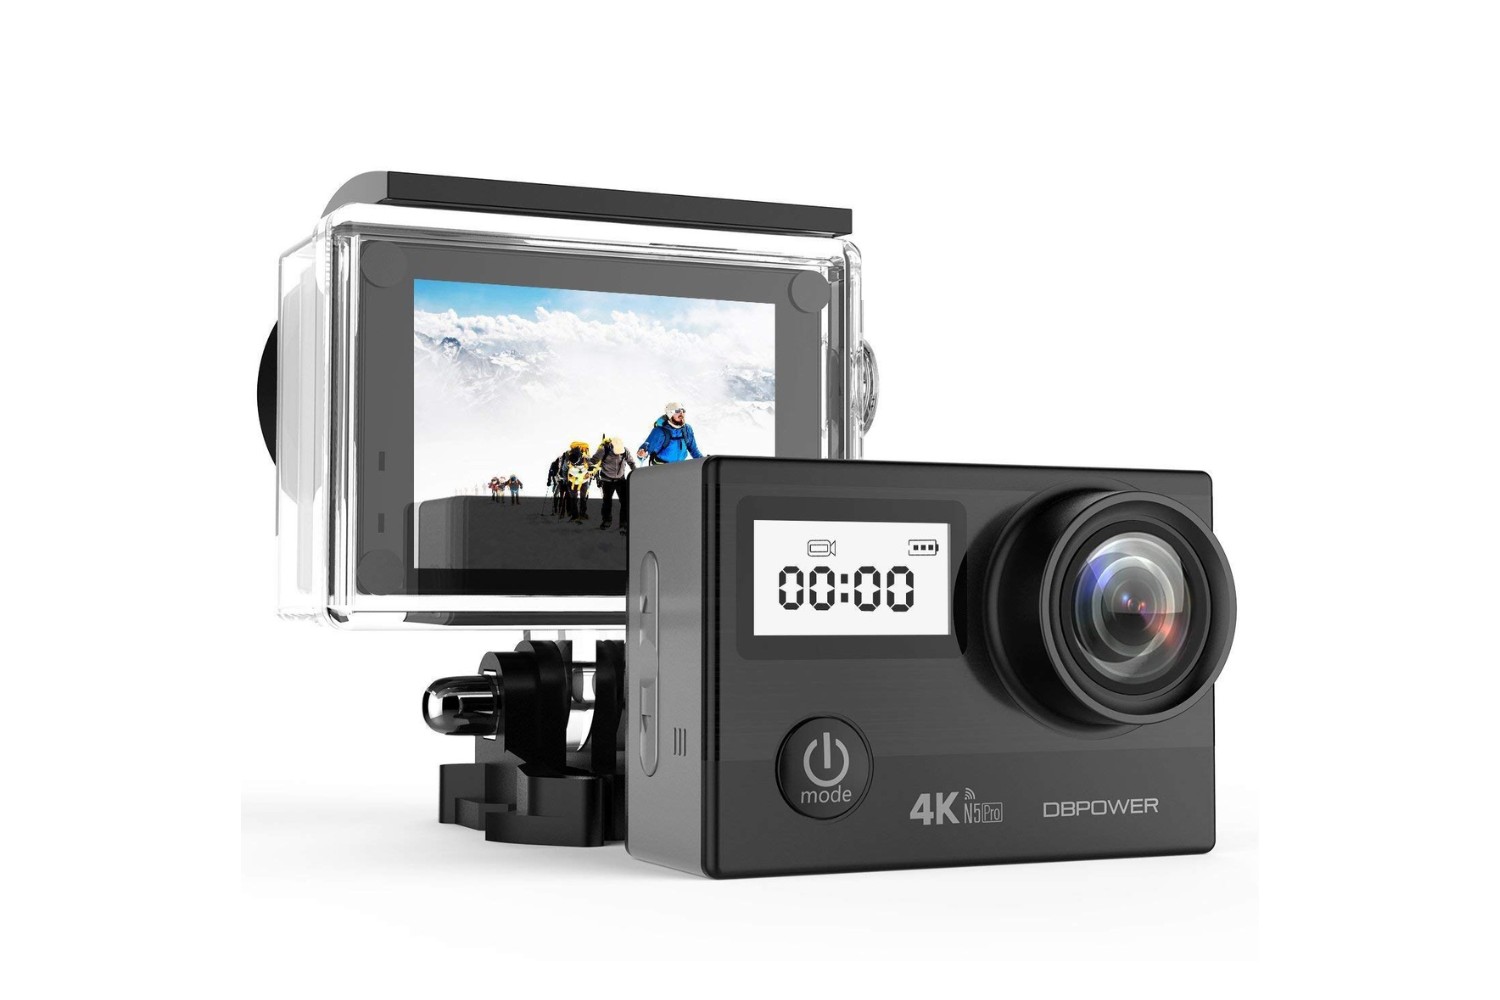 Dbpower N5 Action Camera: Auto Record Start And Stop, Why